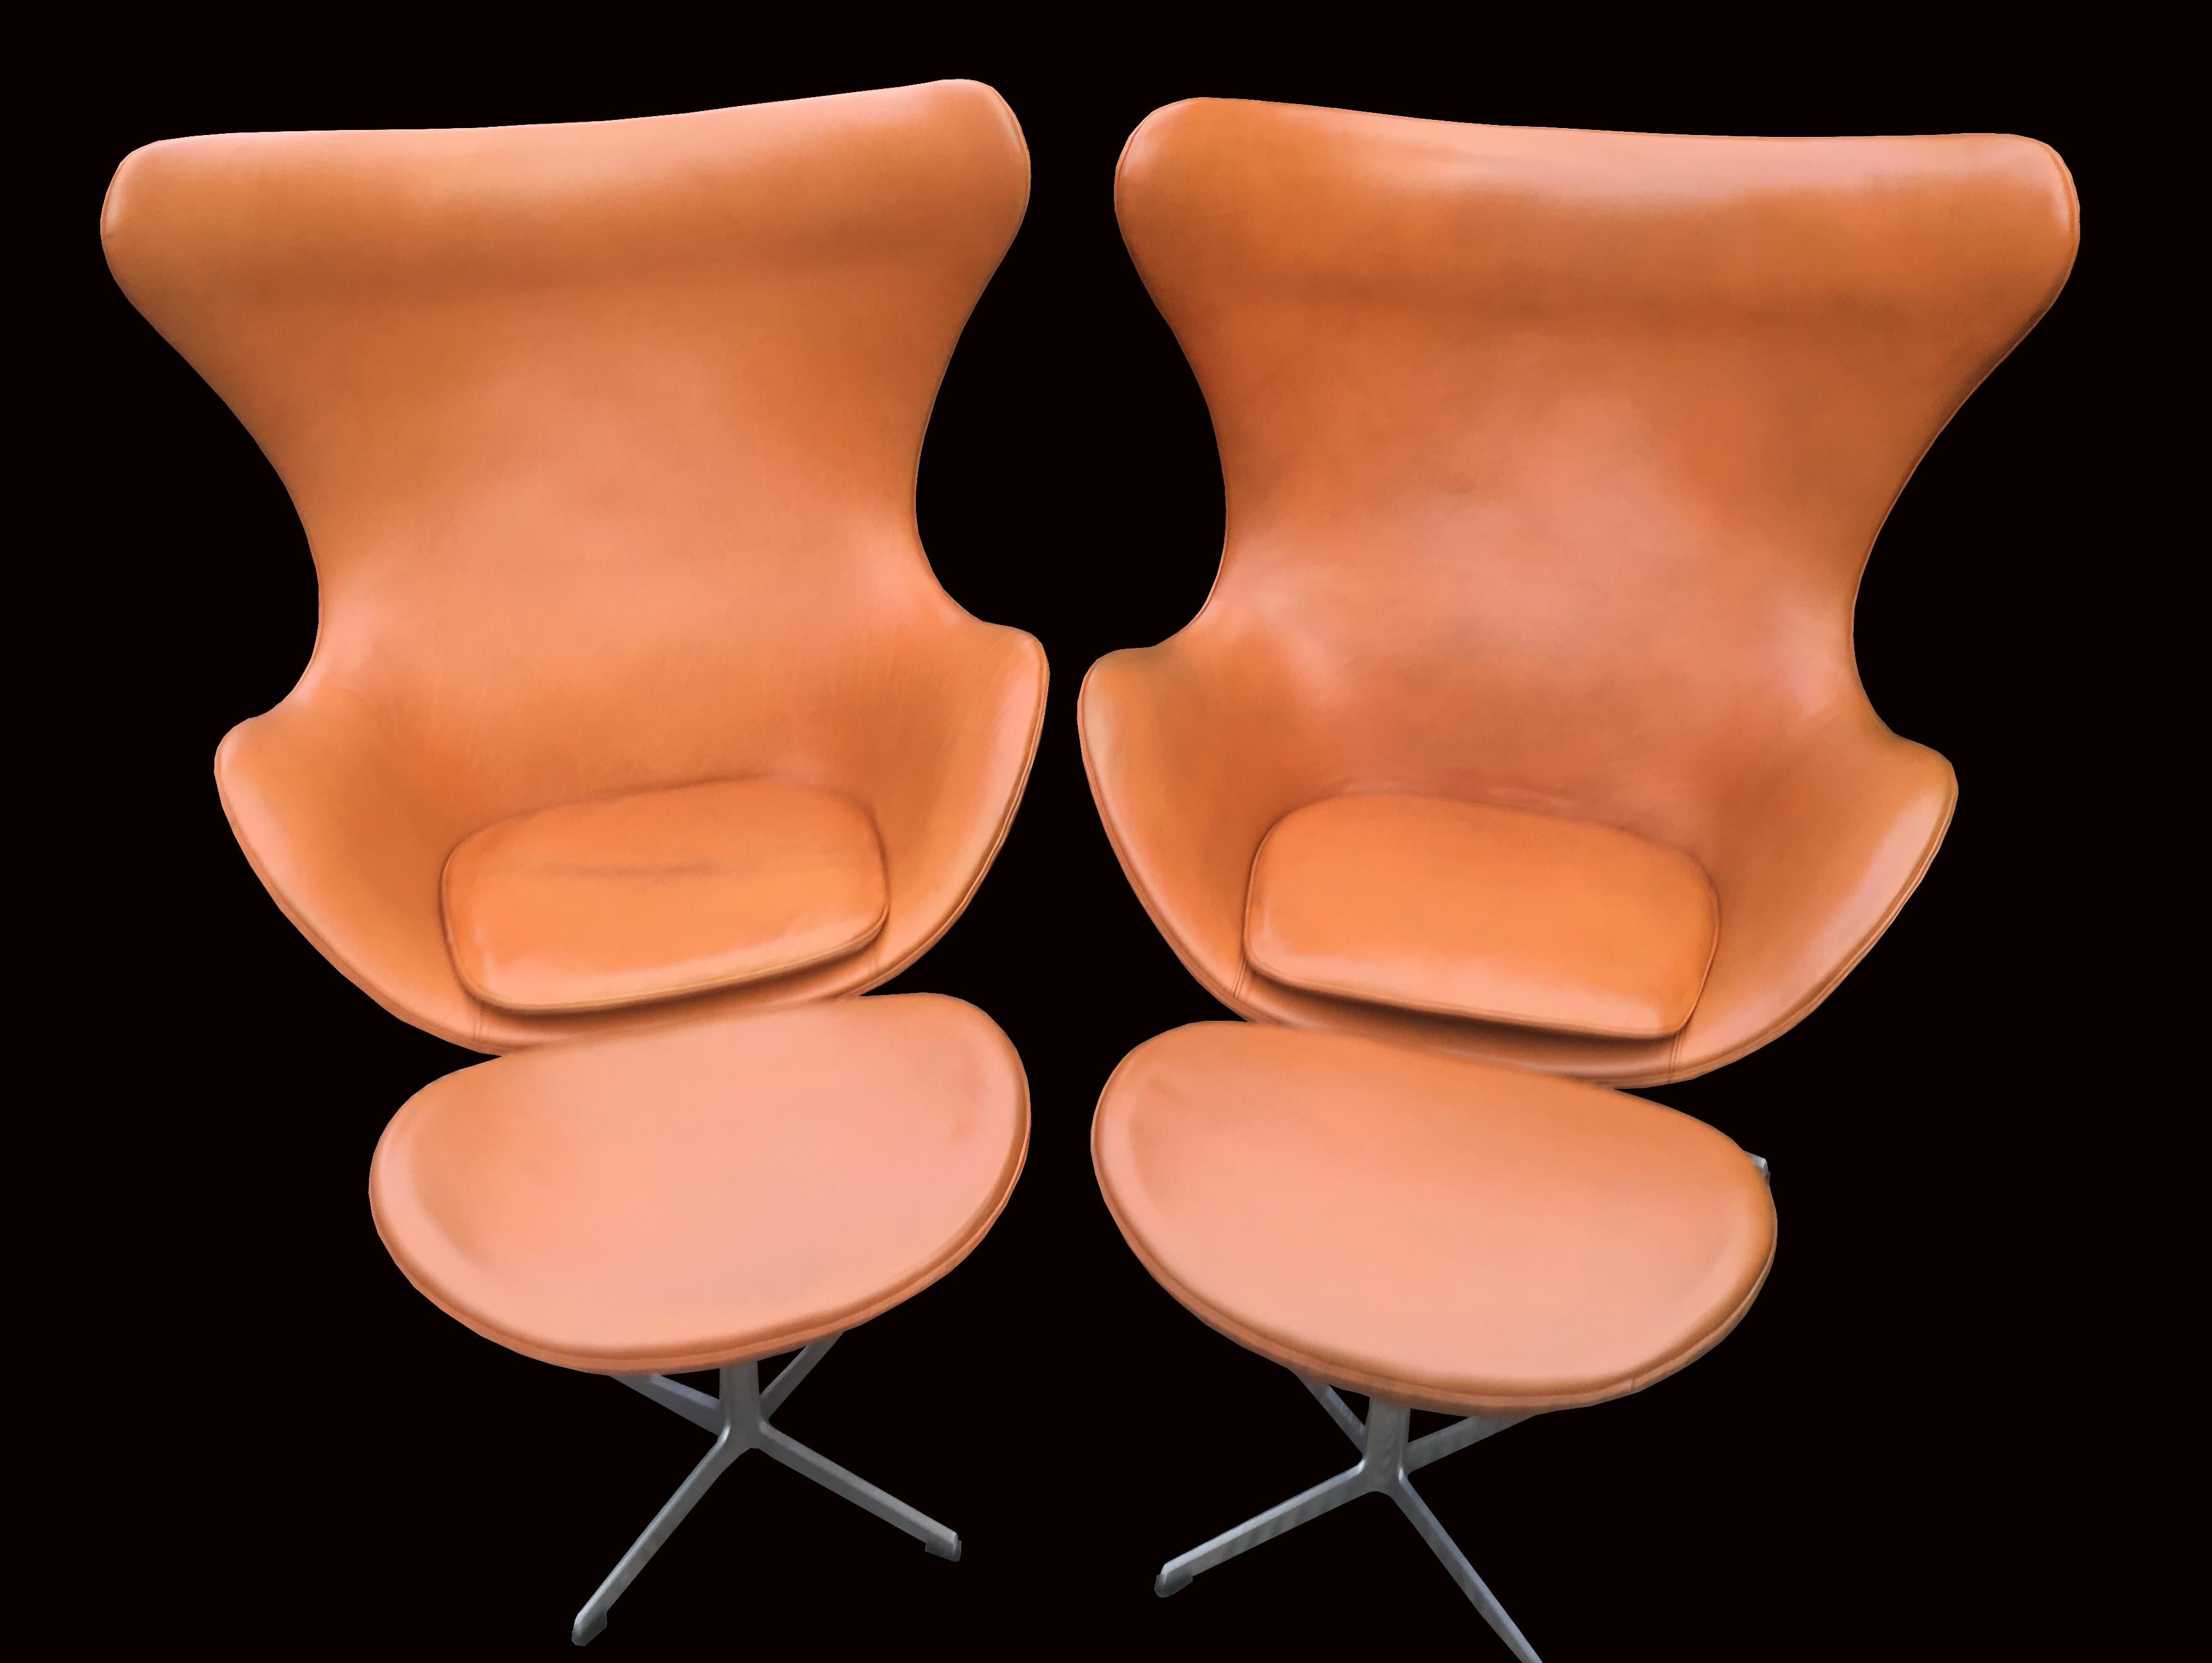 Danish Pair of Cognac Leather Egg Chairs and Ottomans by Arne Jacobsen for Fritz Hansen